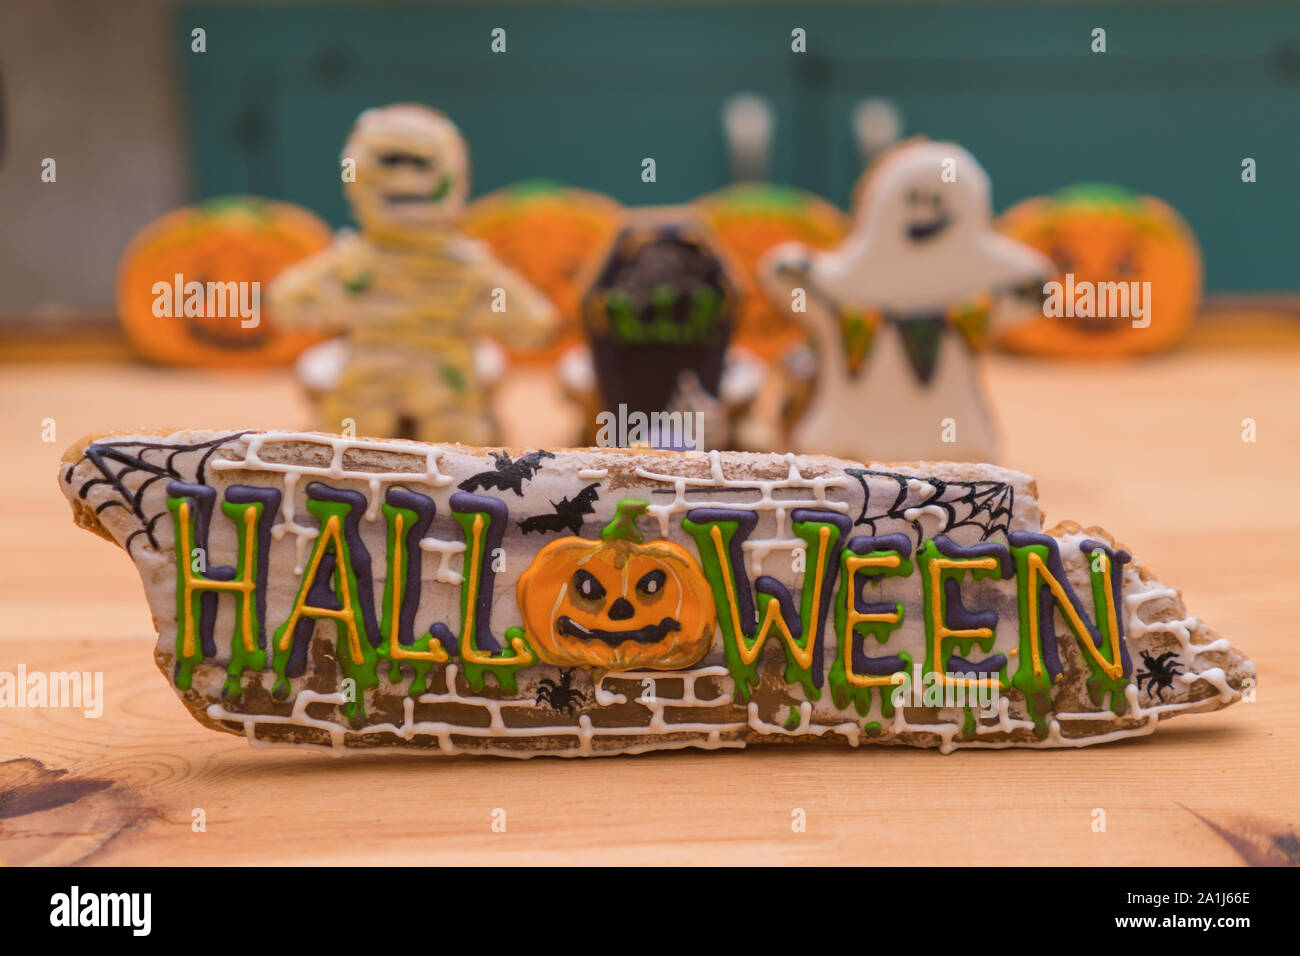 Halloween decals on gingerbreads and ghosts in the background in unfocus. Preparing for a Halloween party. Festive table Stock Photo